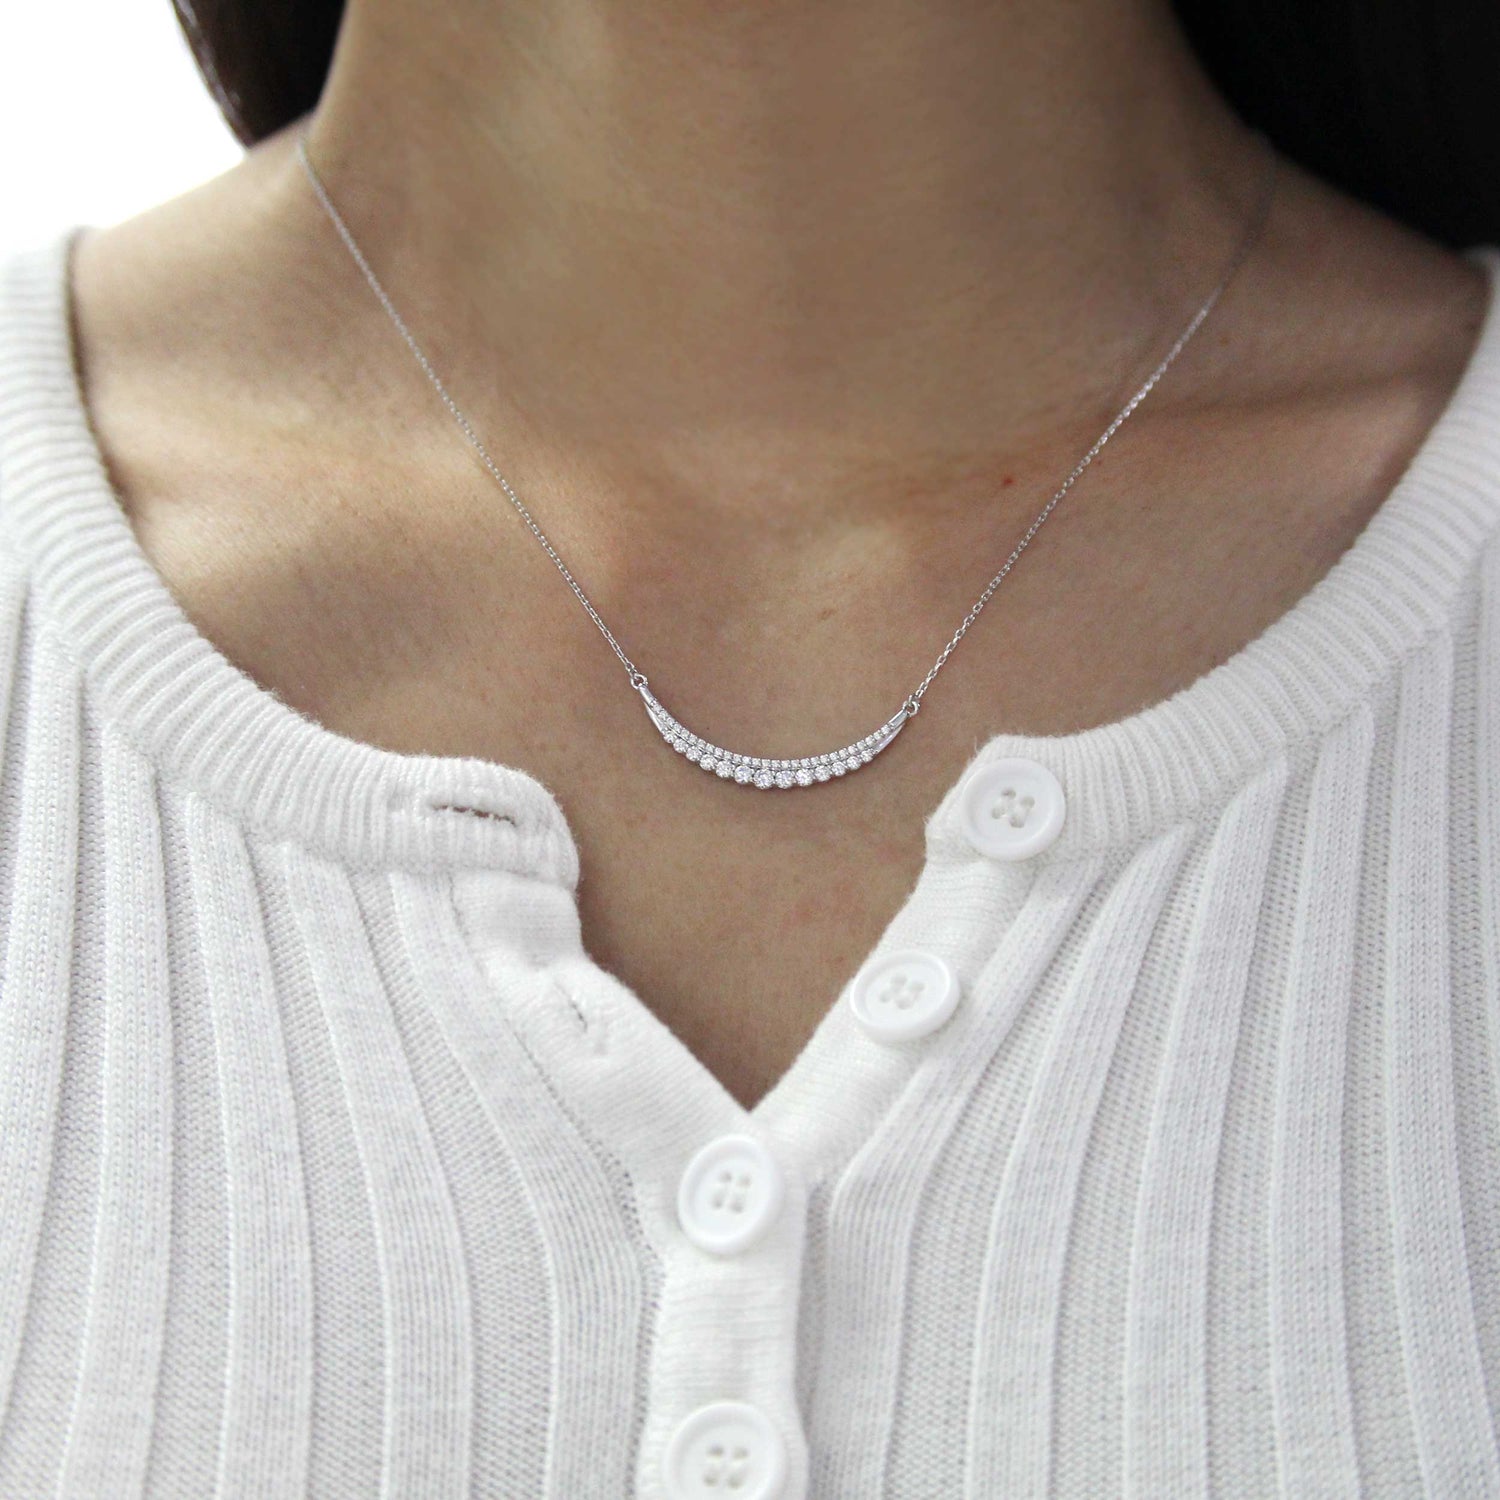 1/2 - 1/5 Cttw Diamond Bar Pendant Necklace set in 925 Sterling Silver crescent moon smile